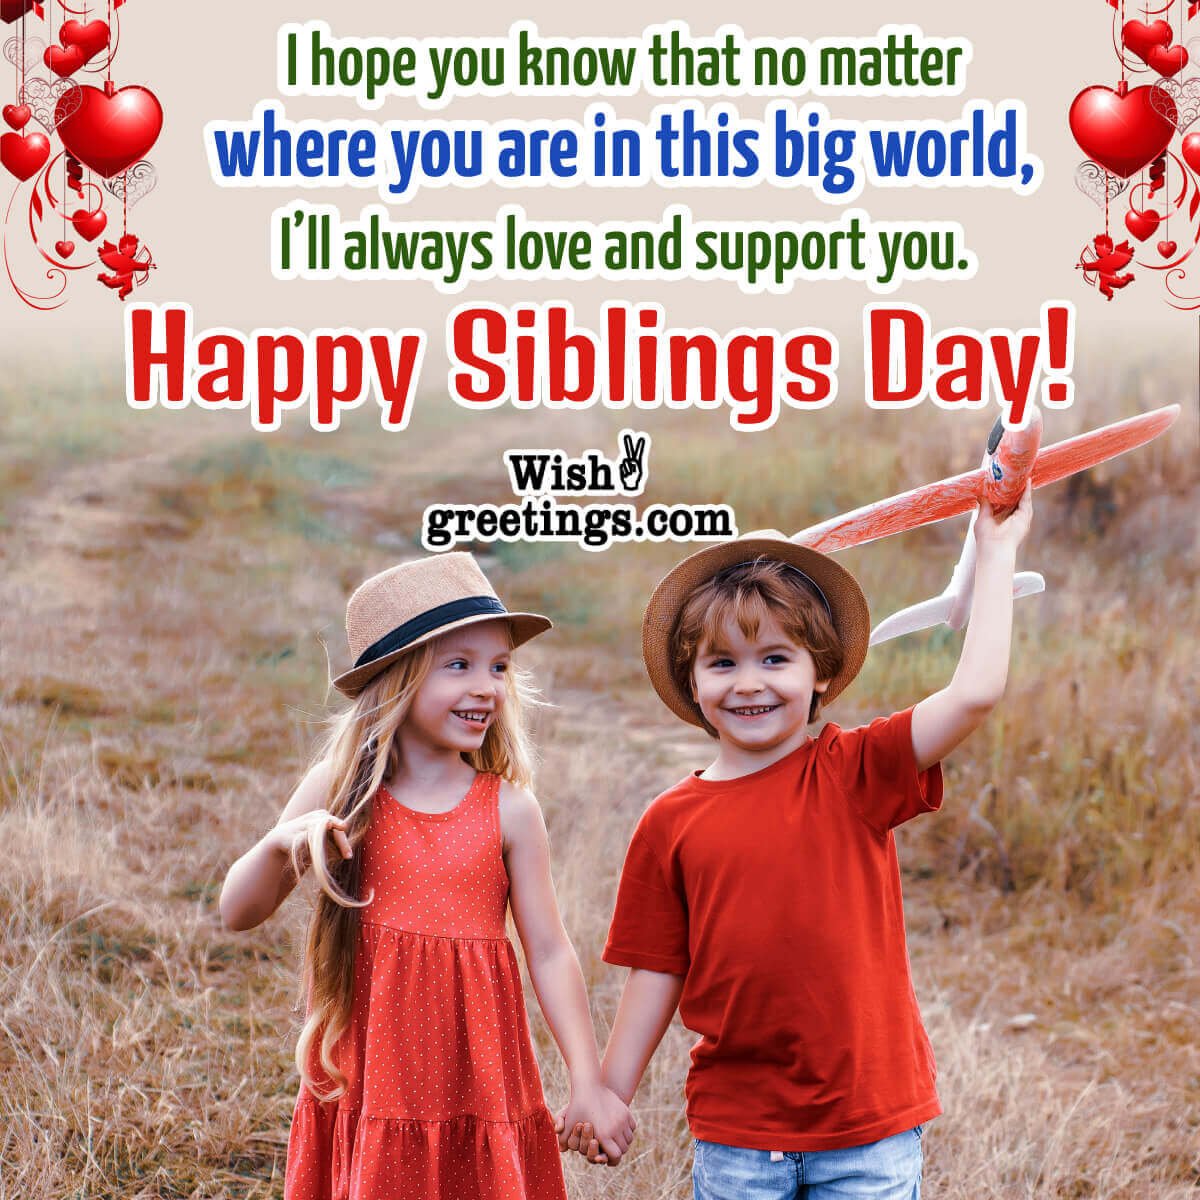 Siblings Day Wishes Messages Wish Greetings